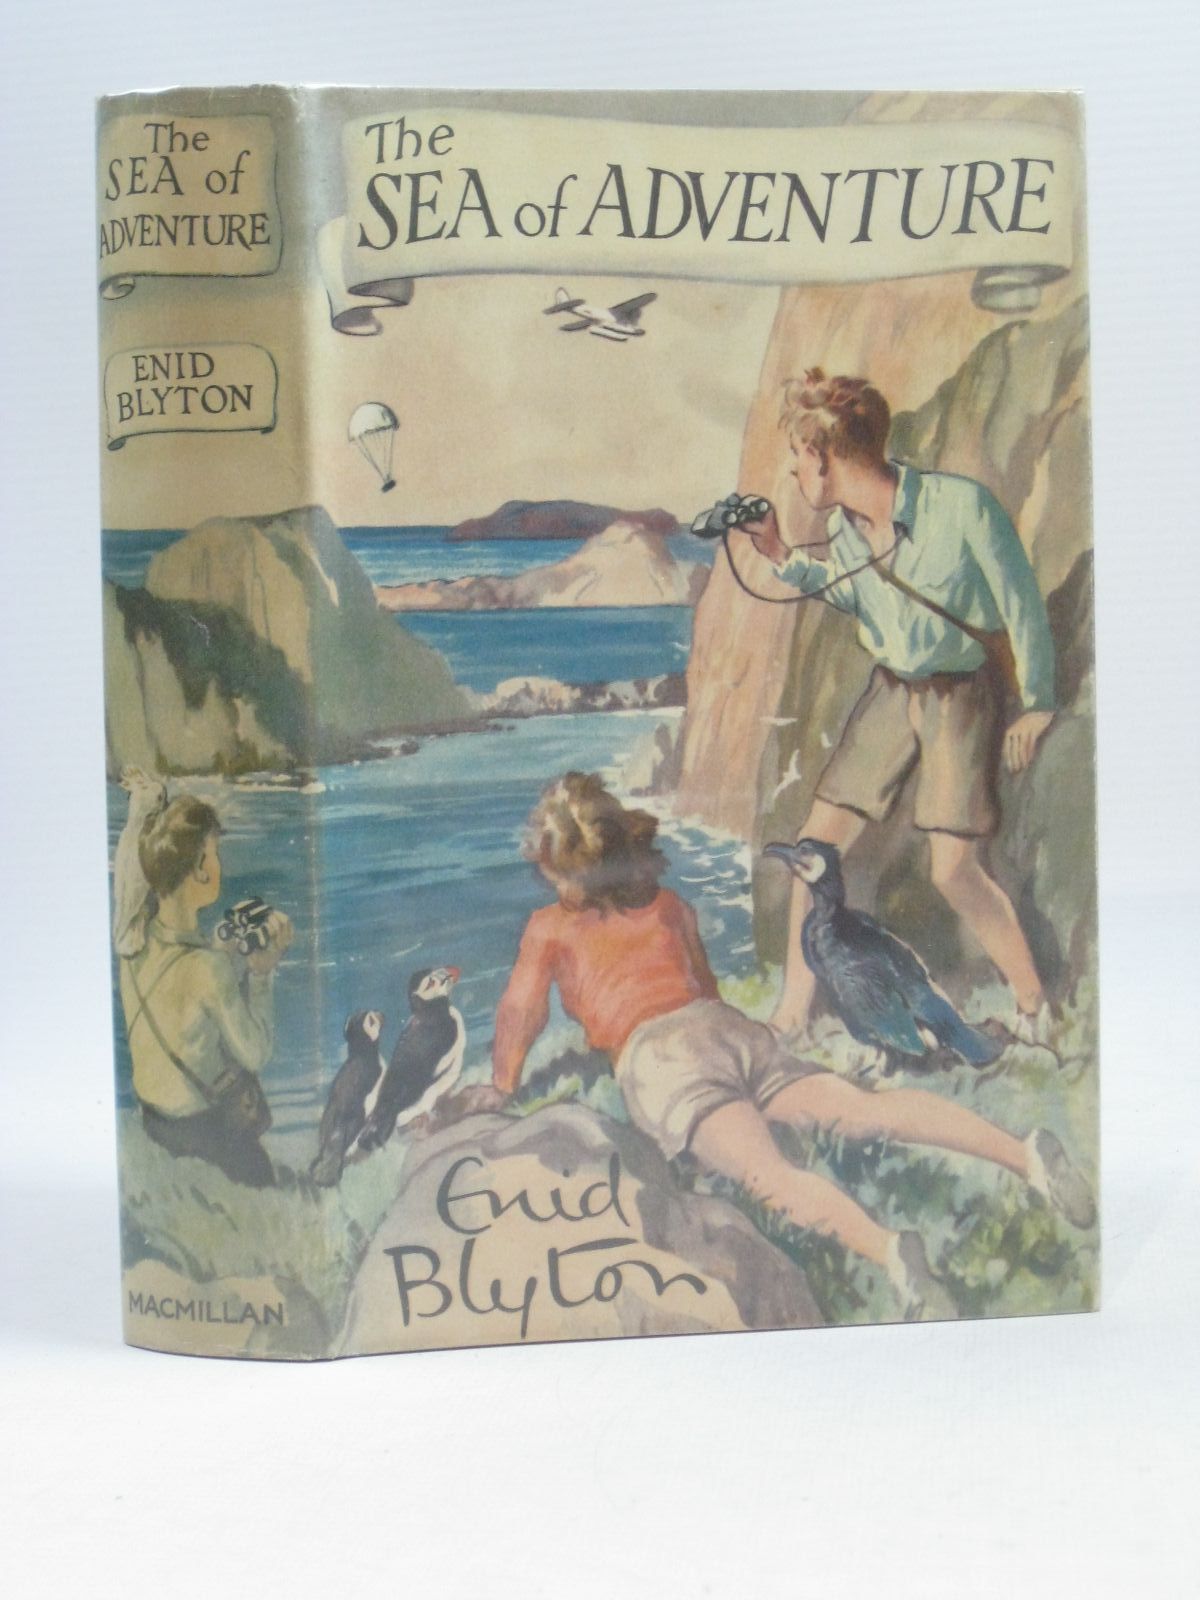 Cover of THE SEA OF ADVENTURE by Enid Blyton